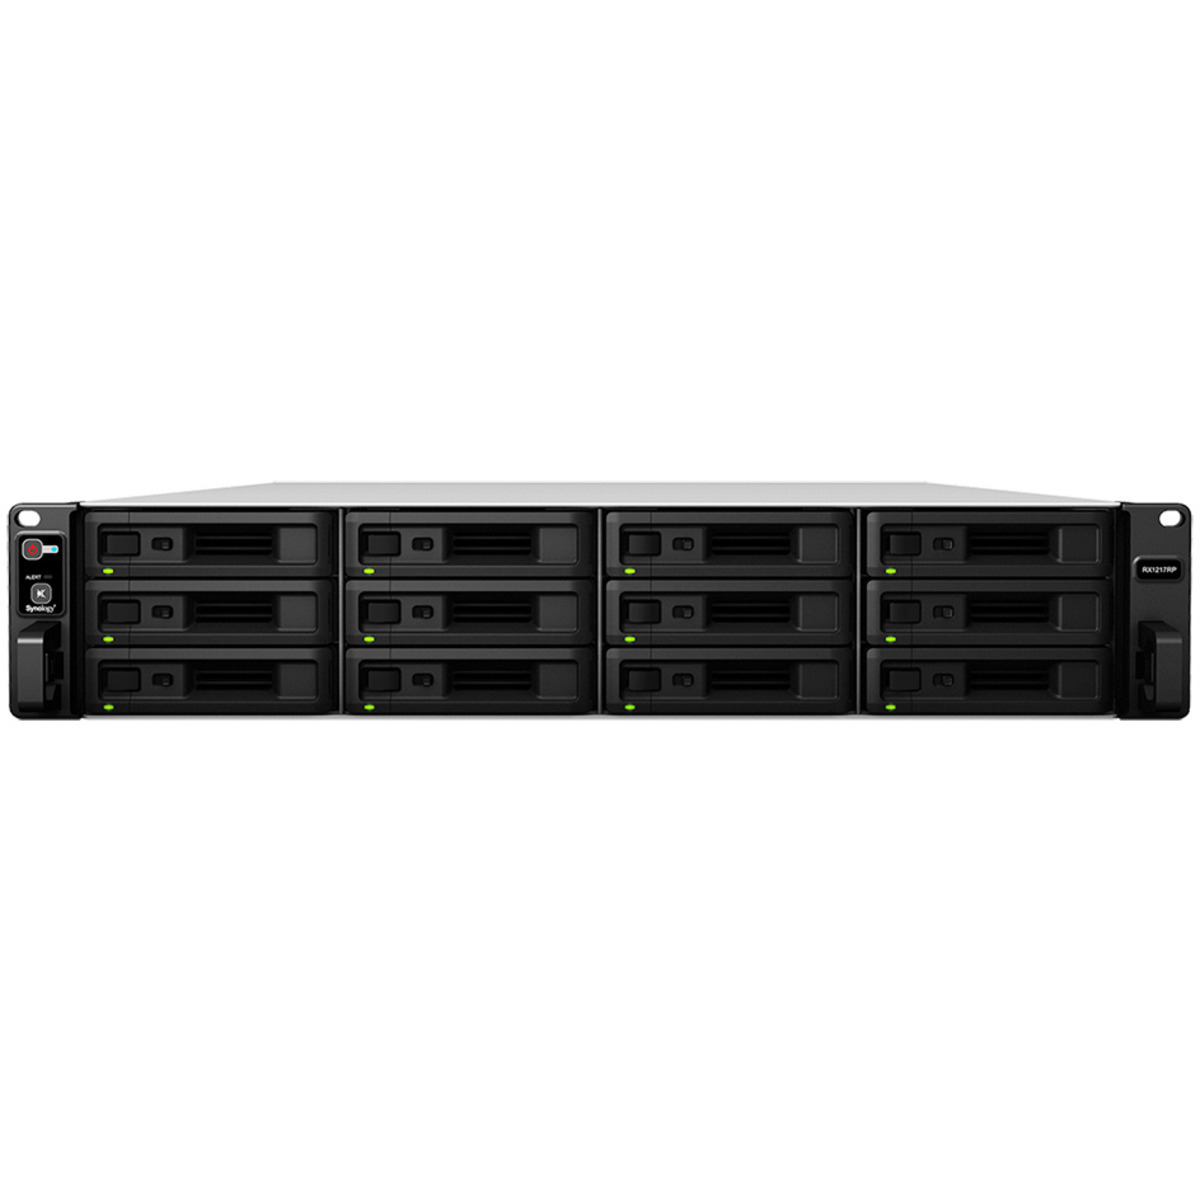 buy $4842 Synology RX1217 192tb RackMount Expansion Enclosure 12x16000gb Toshiba Enterprise Capacity MG08ACA16TE 3.5 7200rpm SATA 6Gb/s HDD ENTERPRISE Class Drives Installed - Burn-In Tested - nas headquarters buy network attached storage server device das new raid-5 free shipping usa RX1217